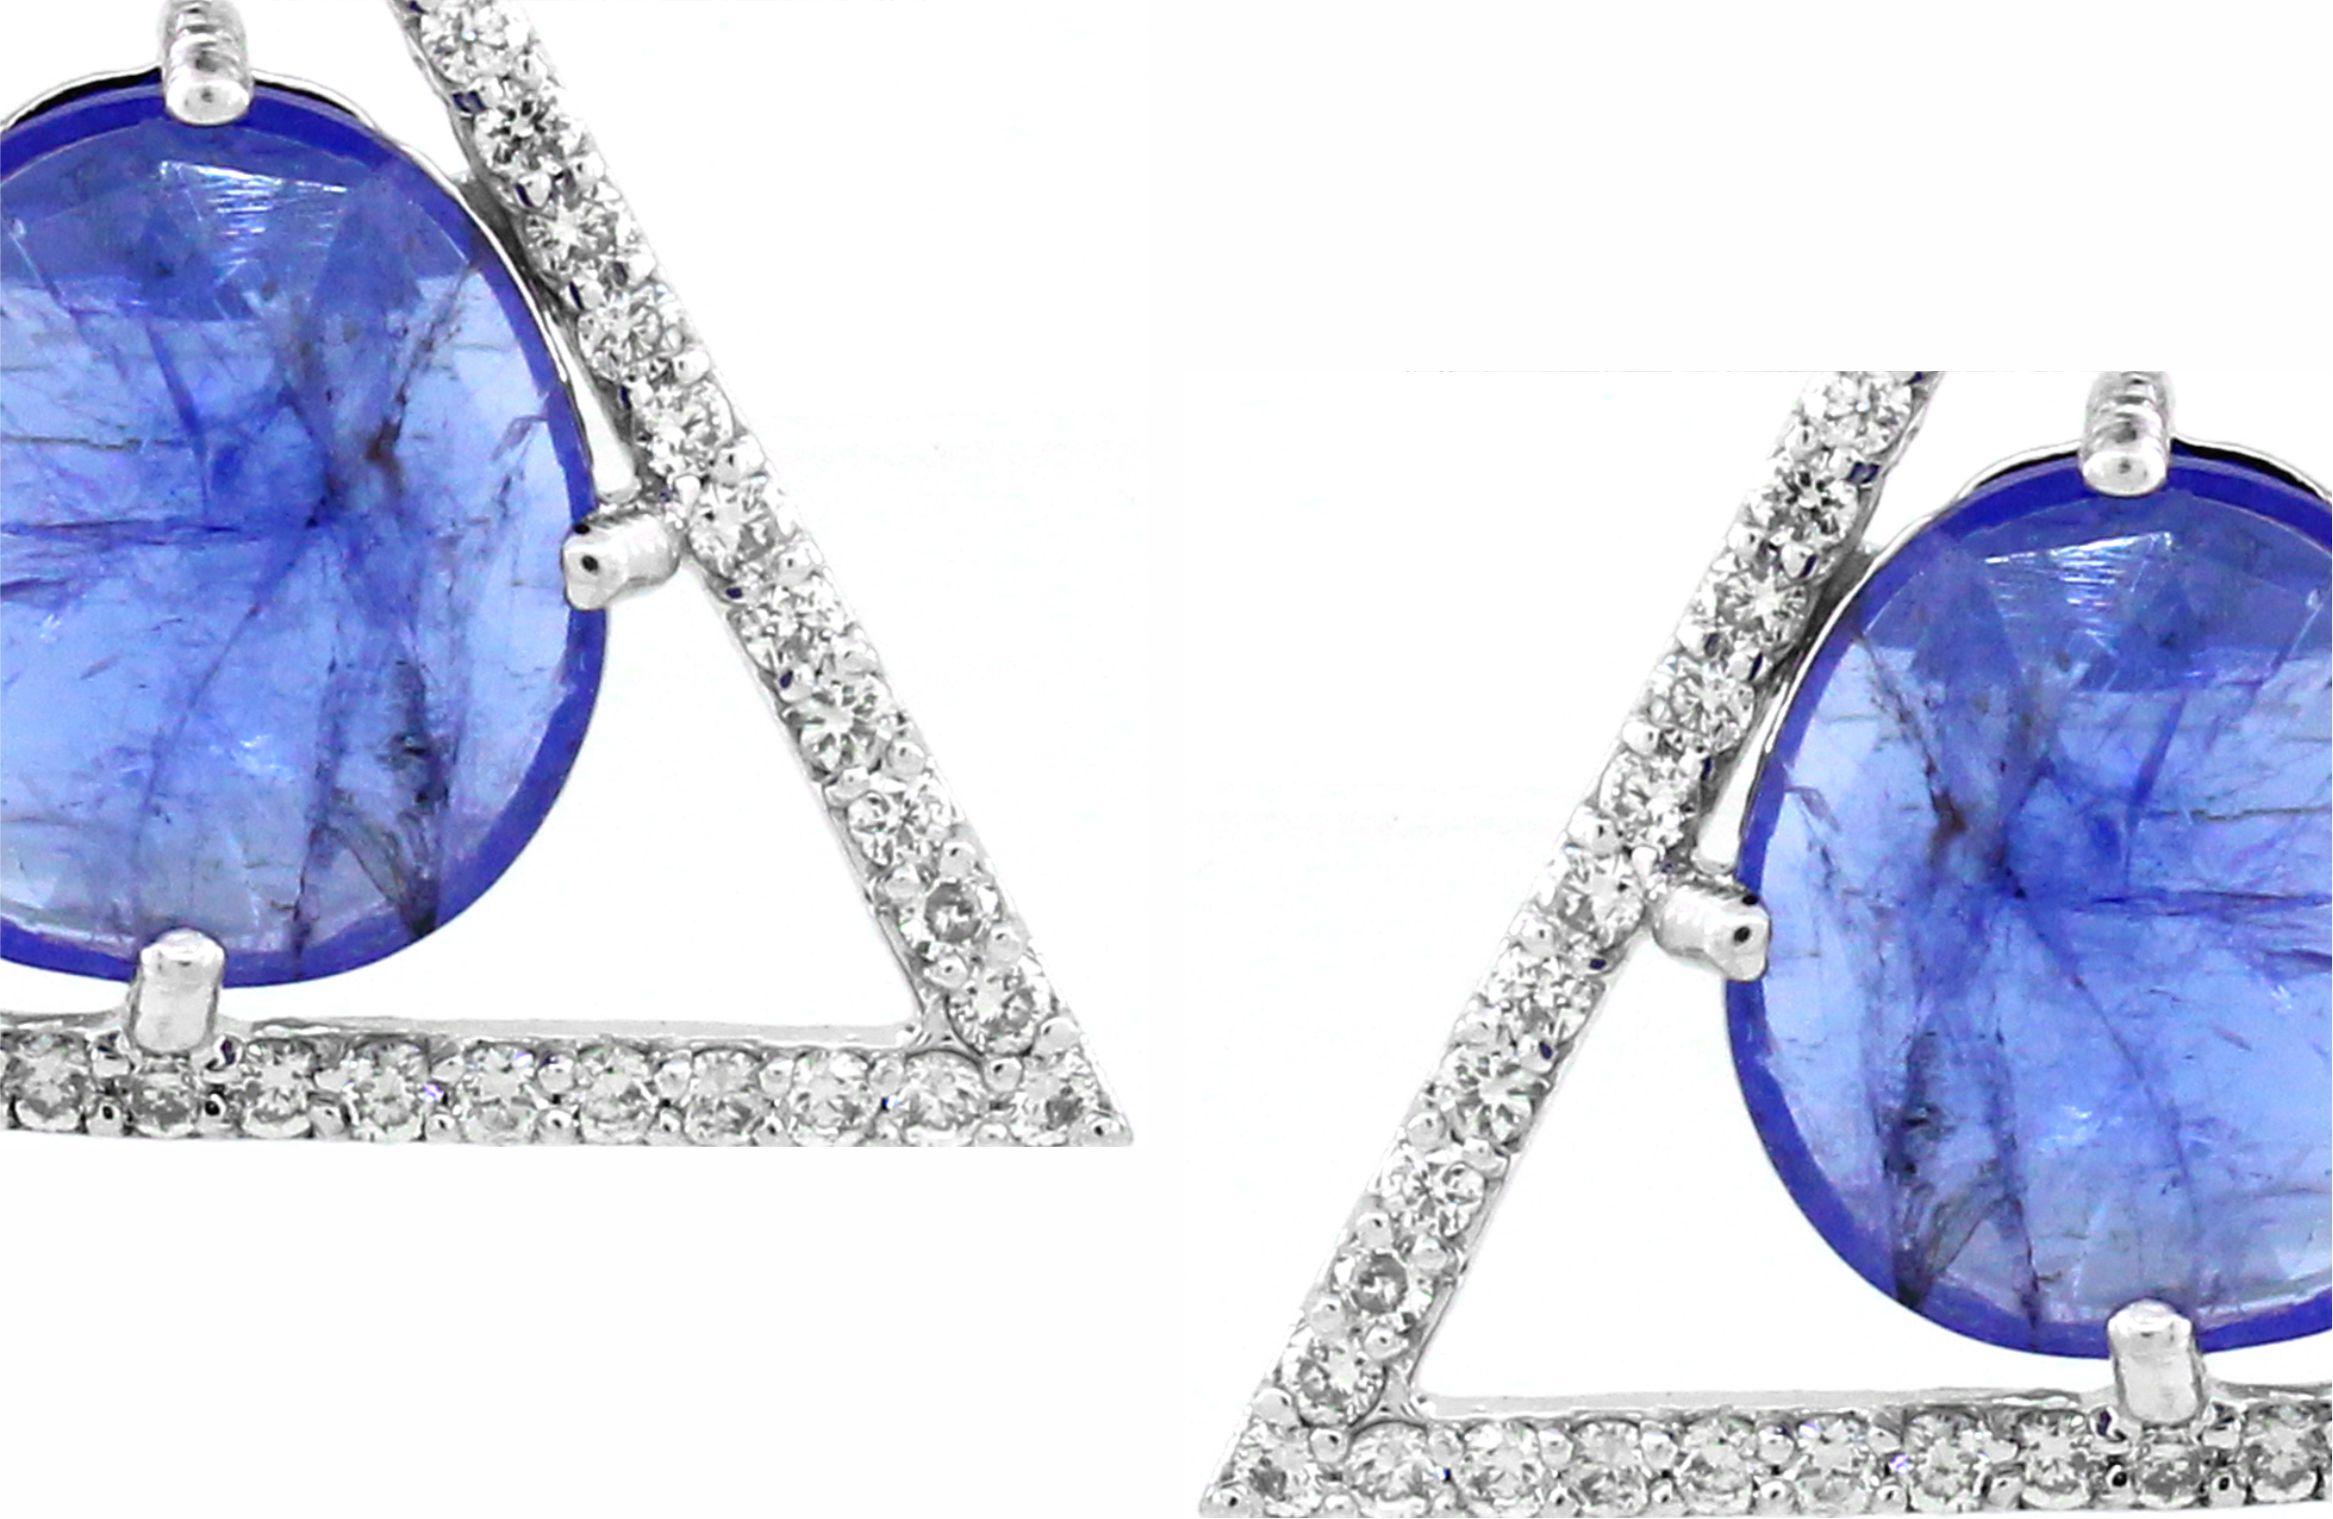 Rough Cut 5.82 carats of Tanzanite Stud Earrings For Sale